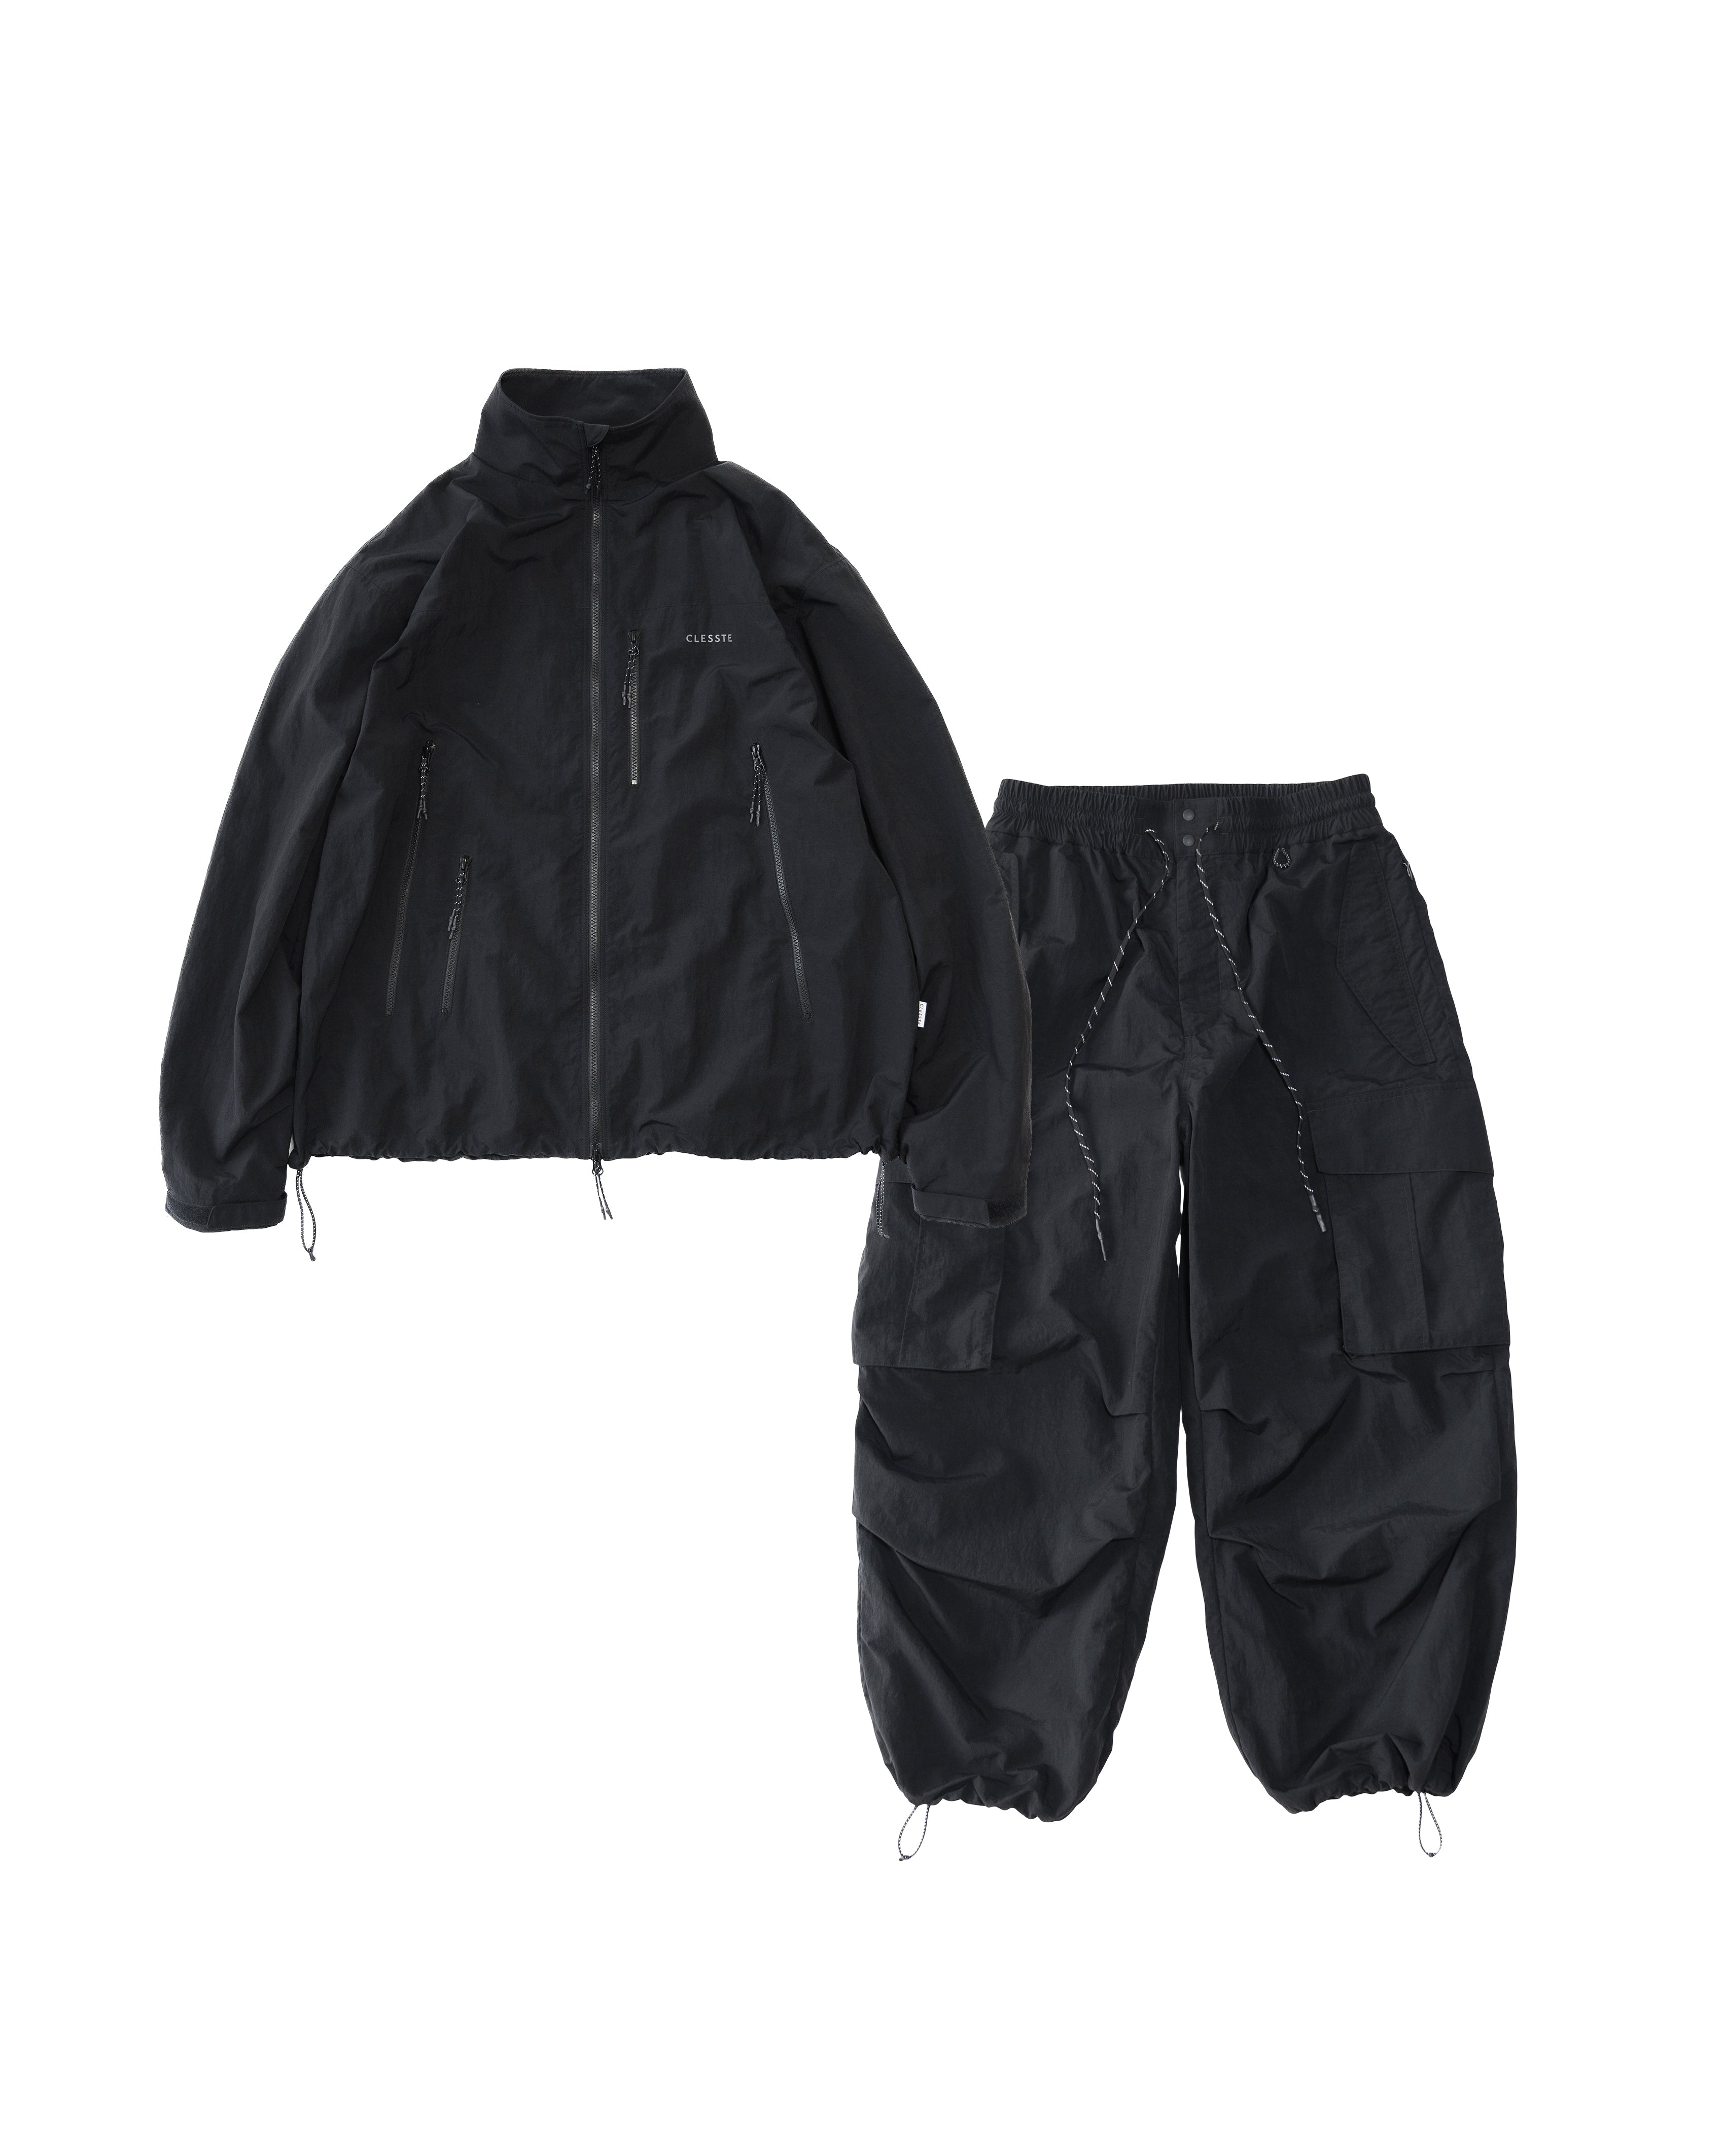 size1the clesste active city pants - ワークパンツ/カーゴパンツ